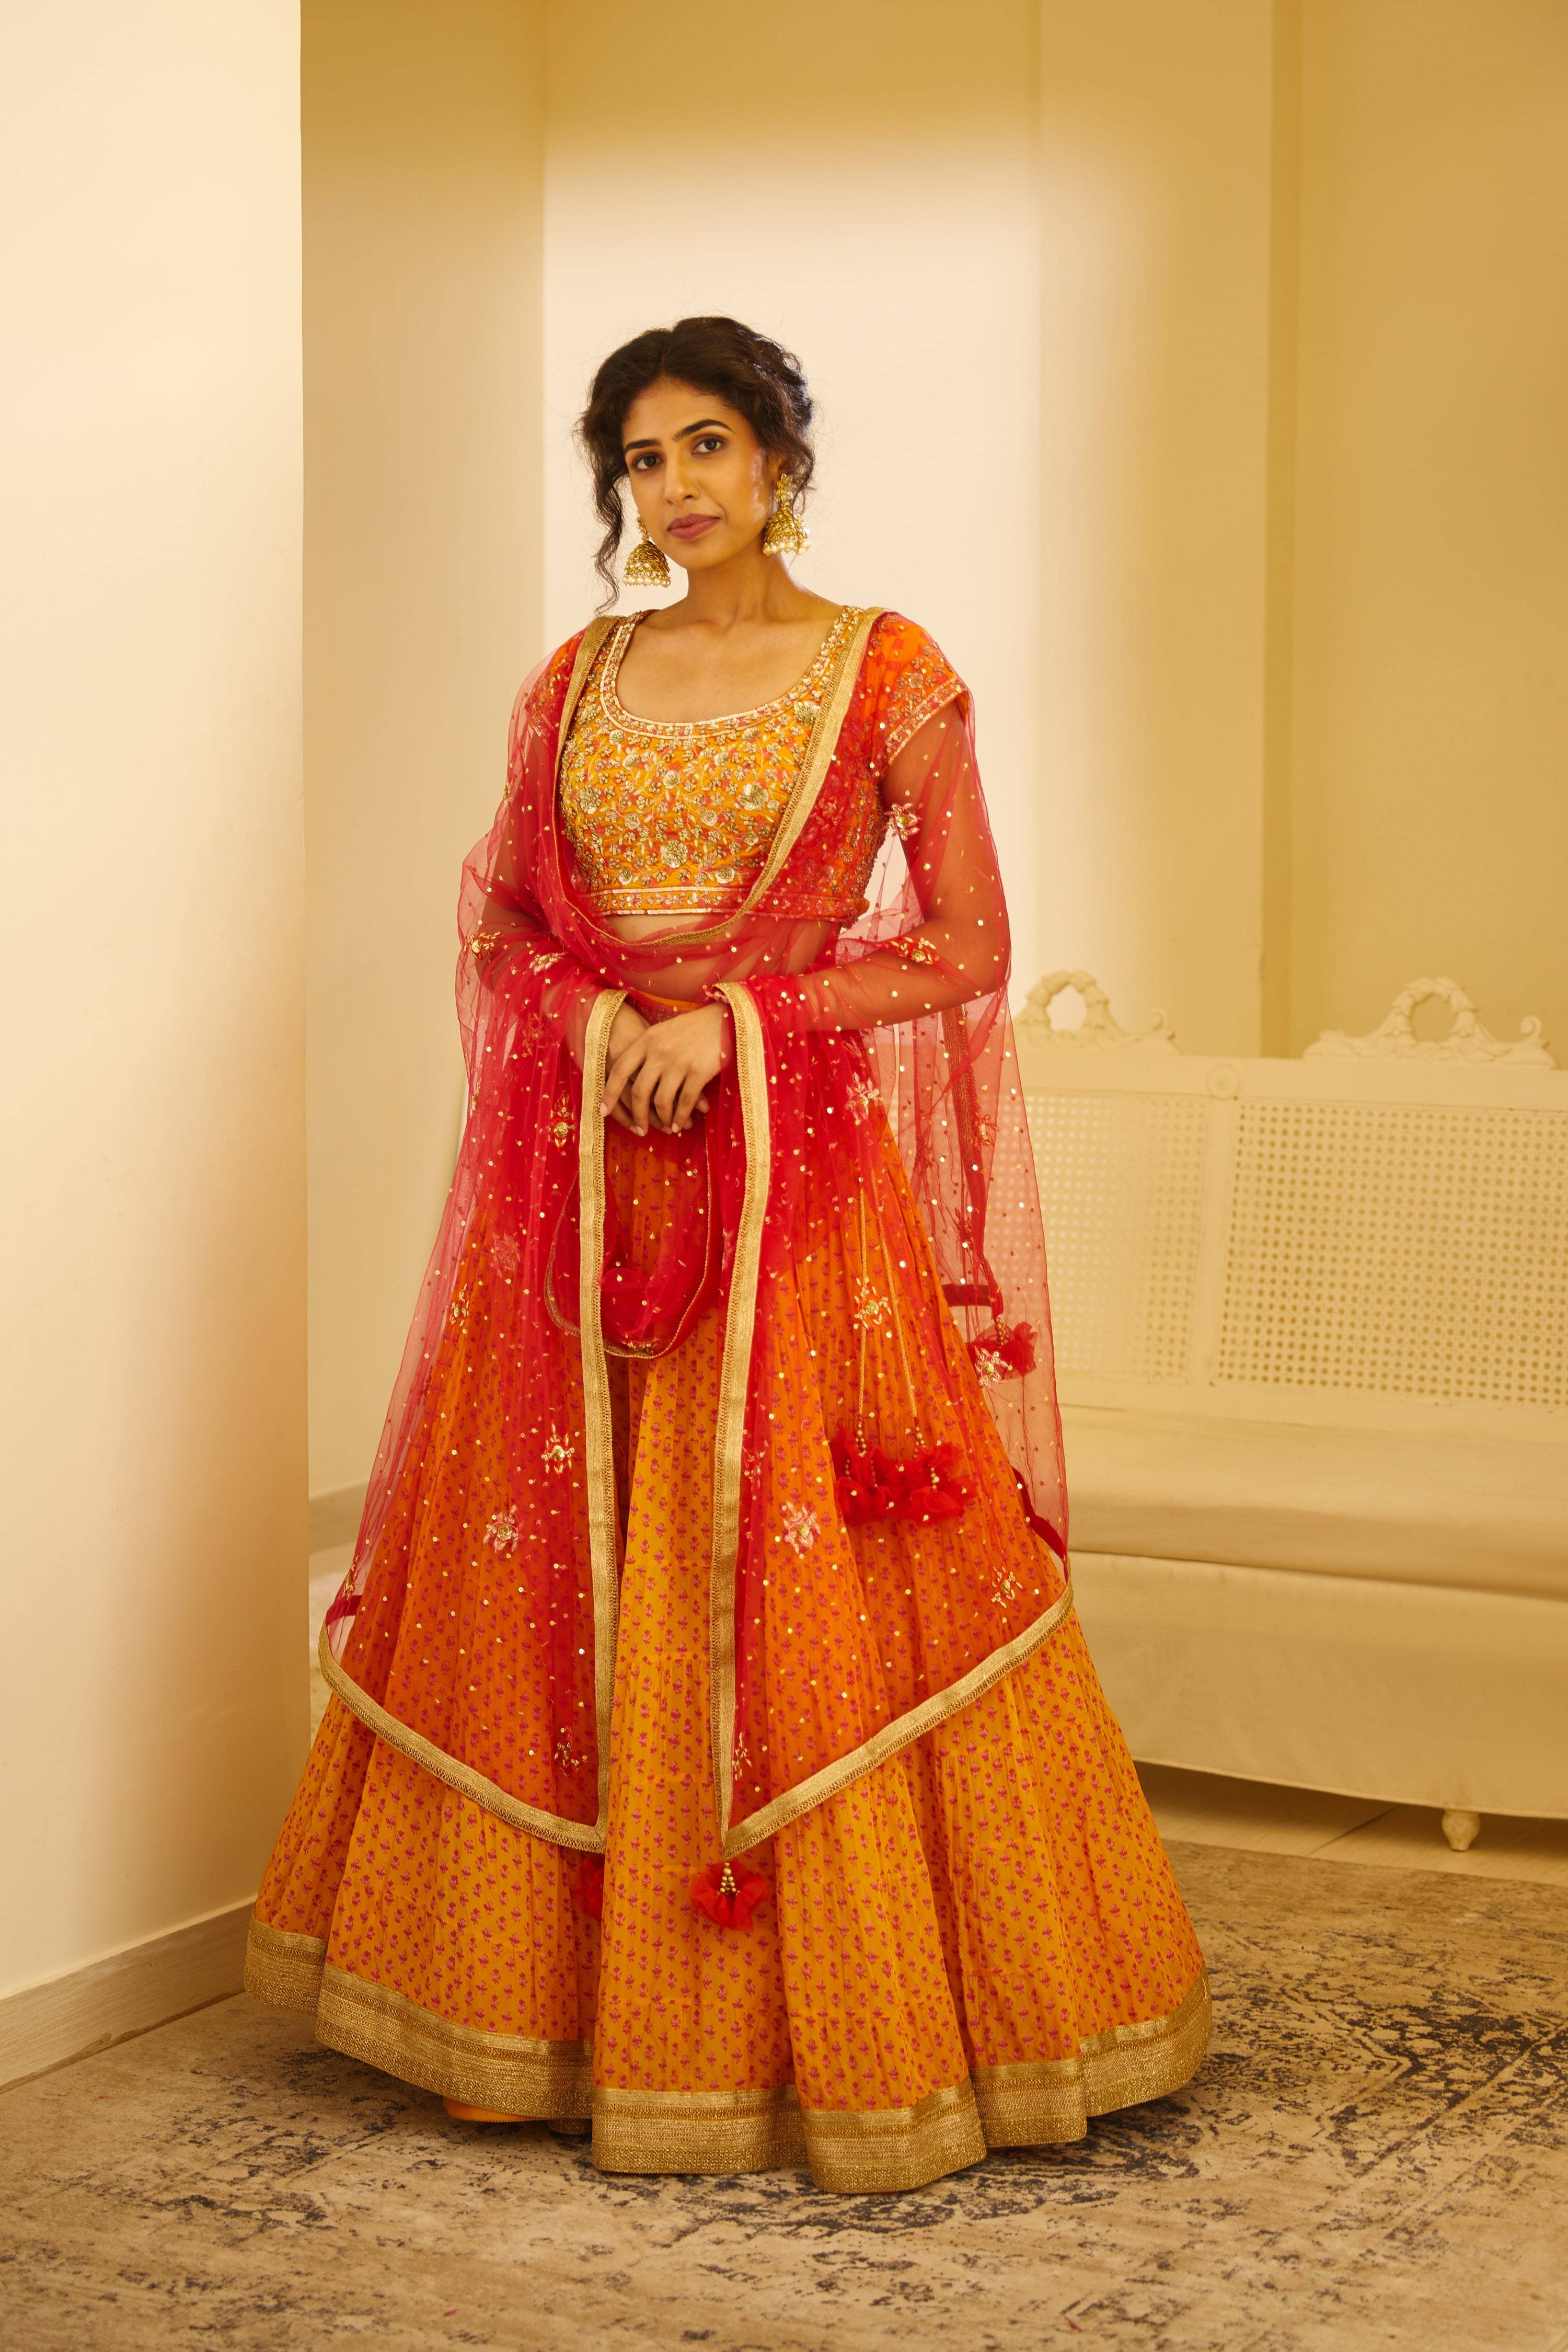 A bright red and orange lehenga complimented with a beautifully crafted  gotapatti work, this color combination looks graceful as… | Orange lehenga,  Lehenga, Fashion